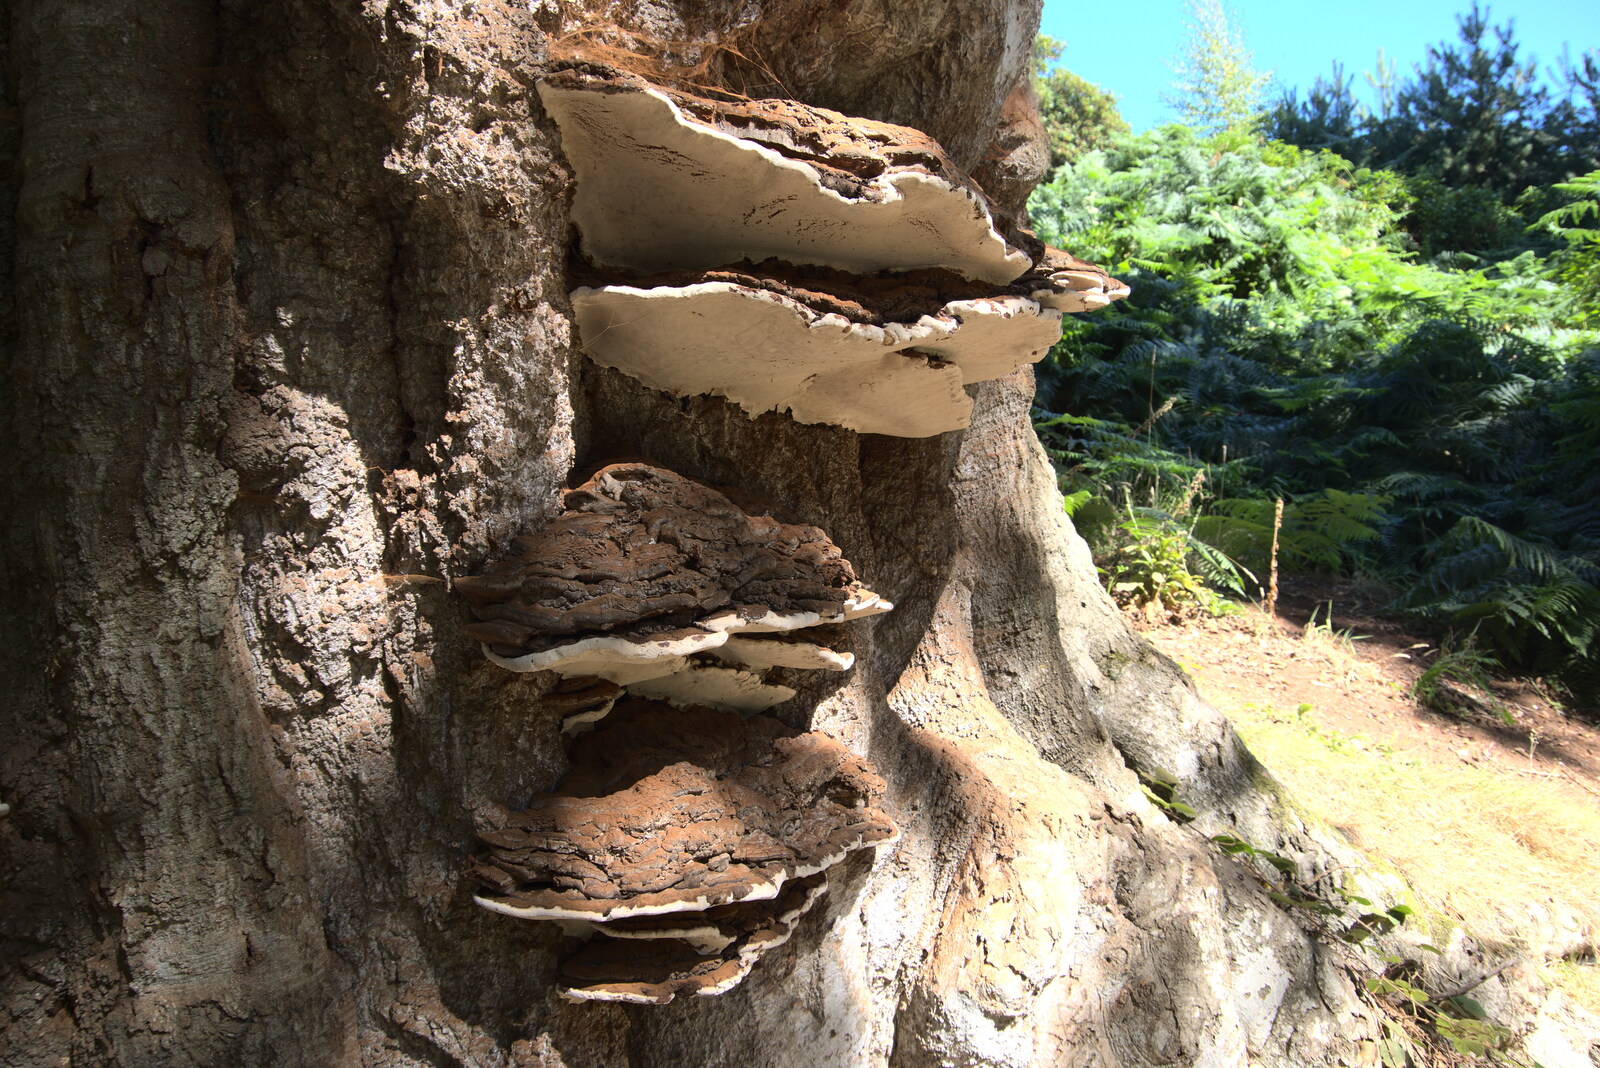 Cool bracket fungus on a tree from Camping at Forest Park, Cromer, Norfolk - 12th August 2022